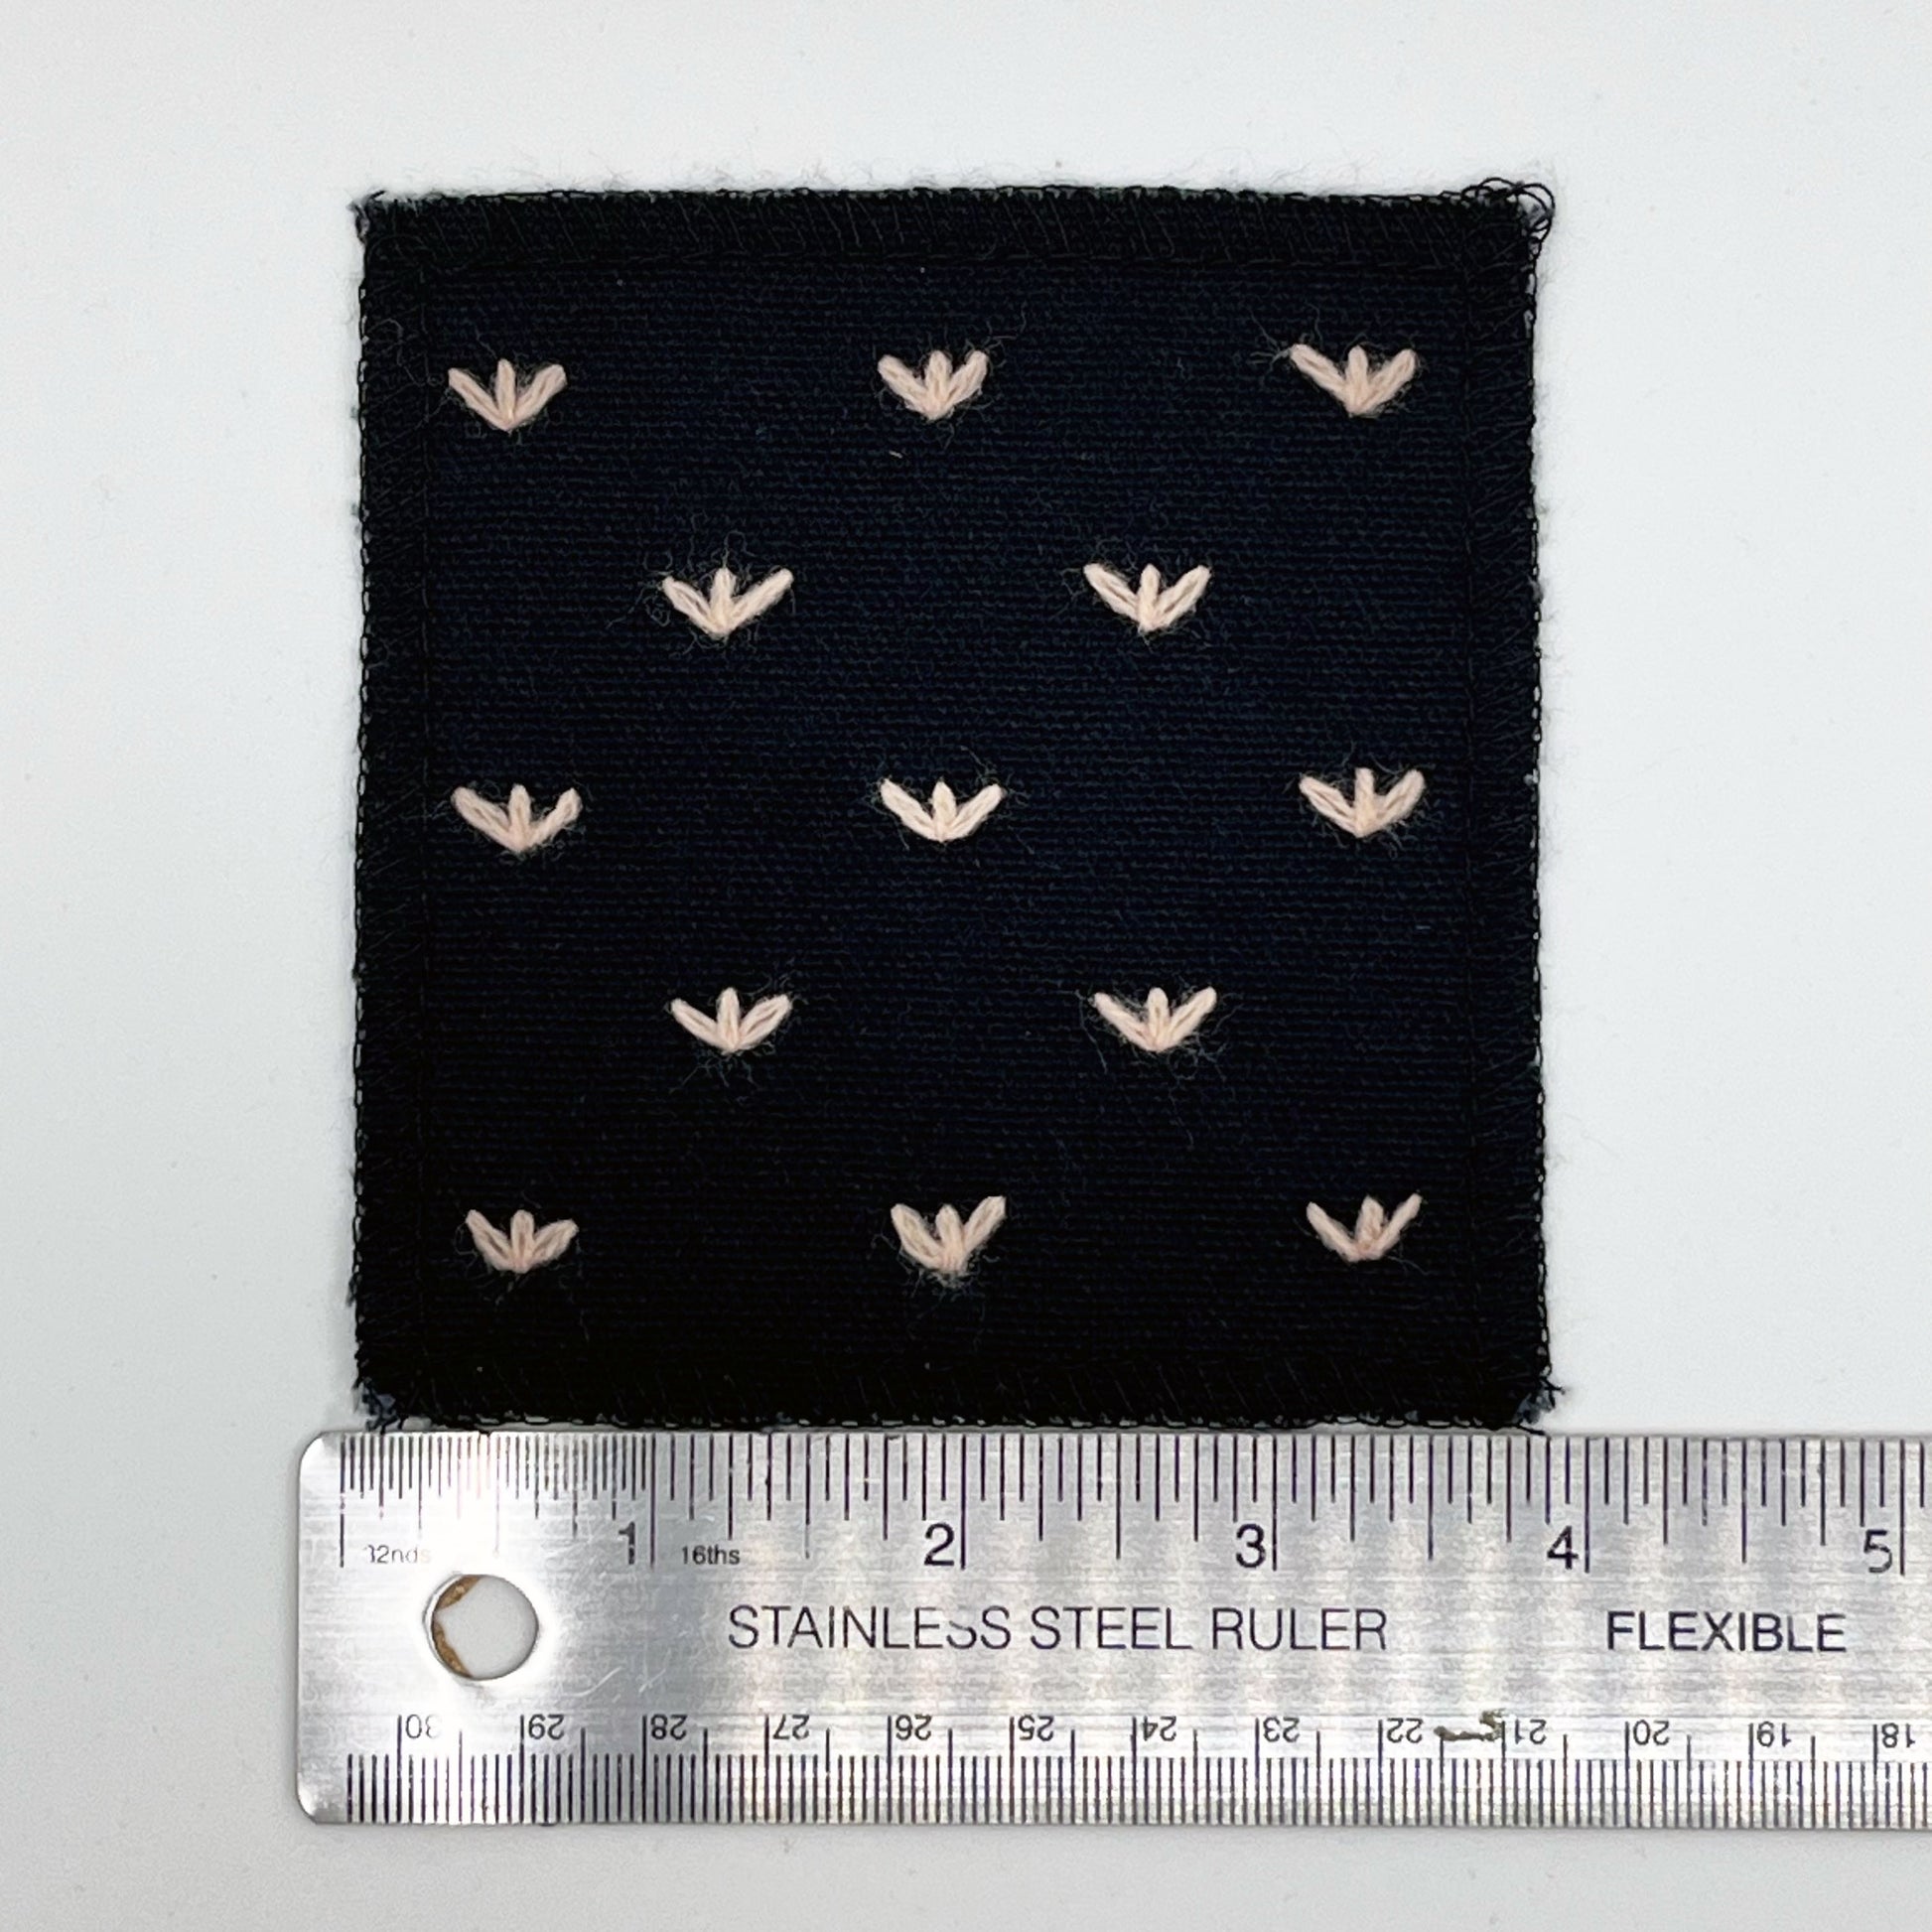 a square black canvas patch, with peach stitches that look like birds feet or sprouts spread out in a diamond pattern, with overlocked edges, placed next to a metal ruler to show a width of four inches, on a white background